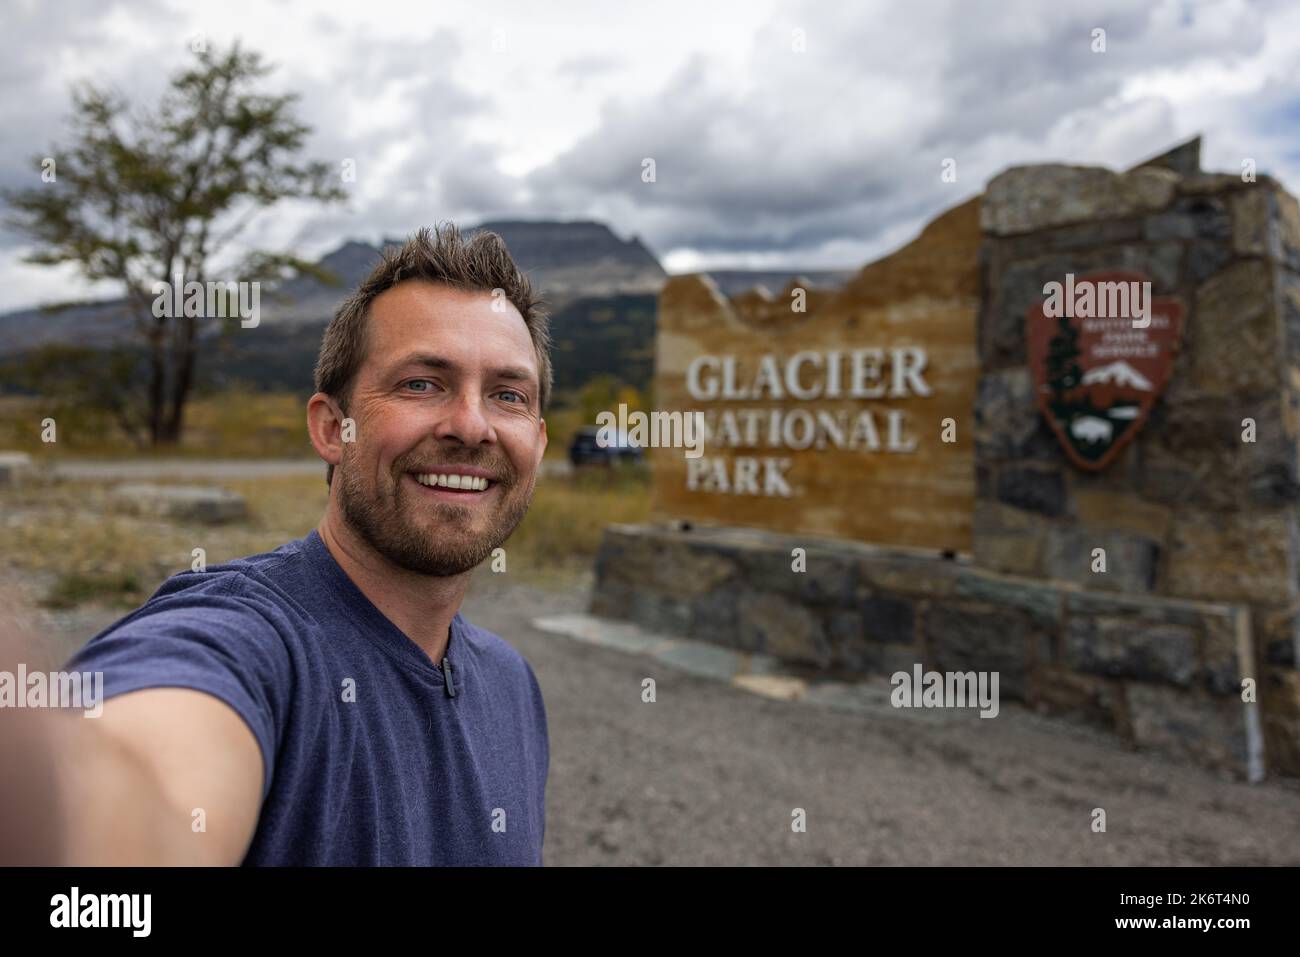 Person with a microphone clipped to his shirt taking a selfie in front of the east entrance sign for Glacier National Park Stock Photo